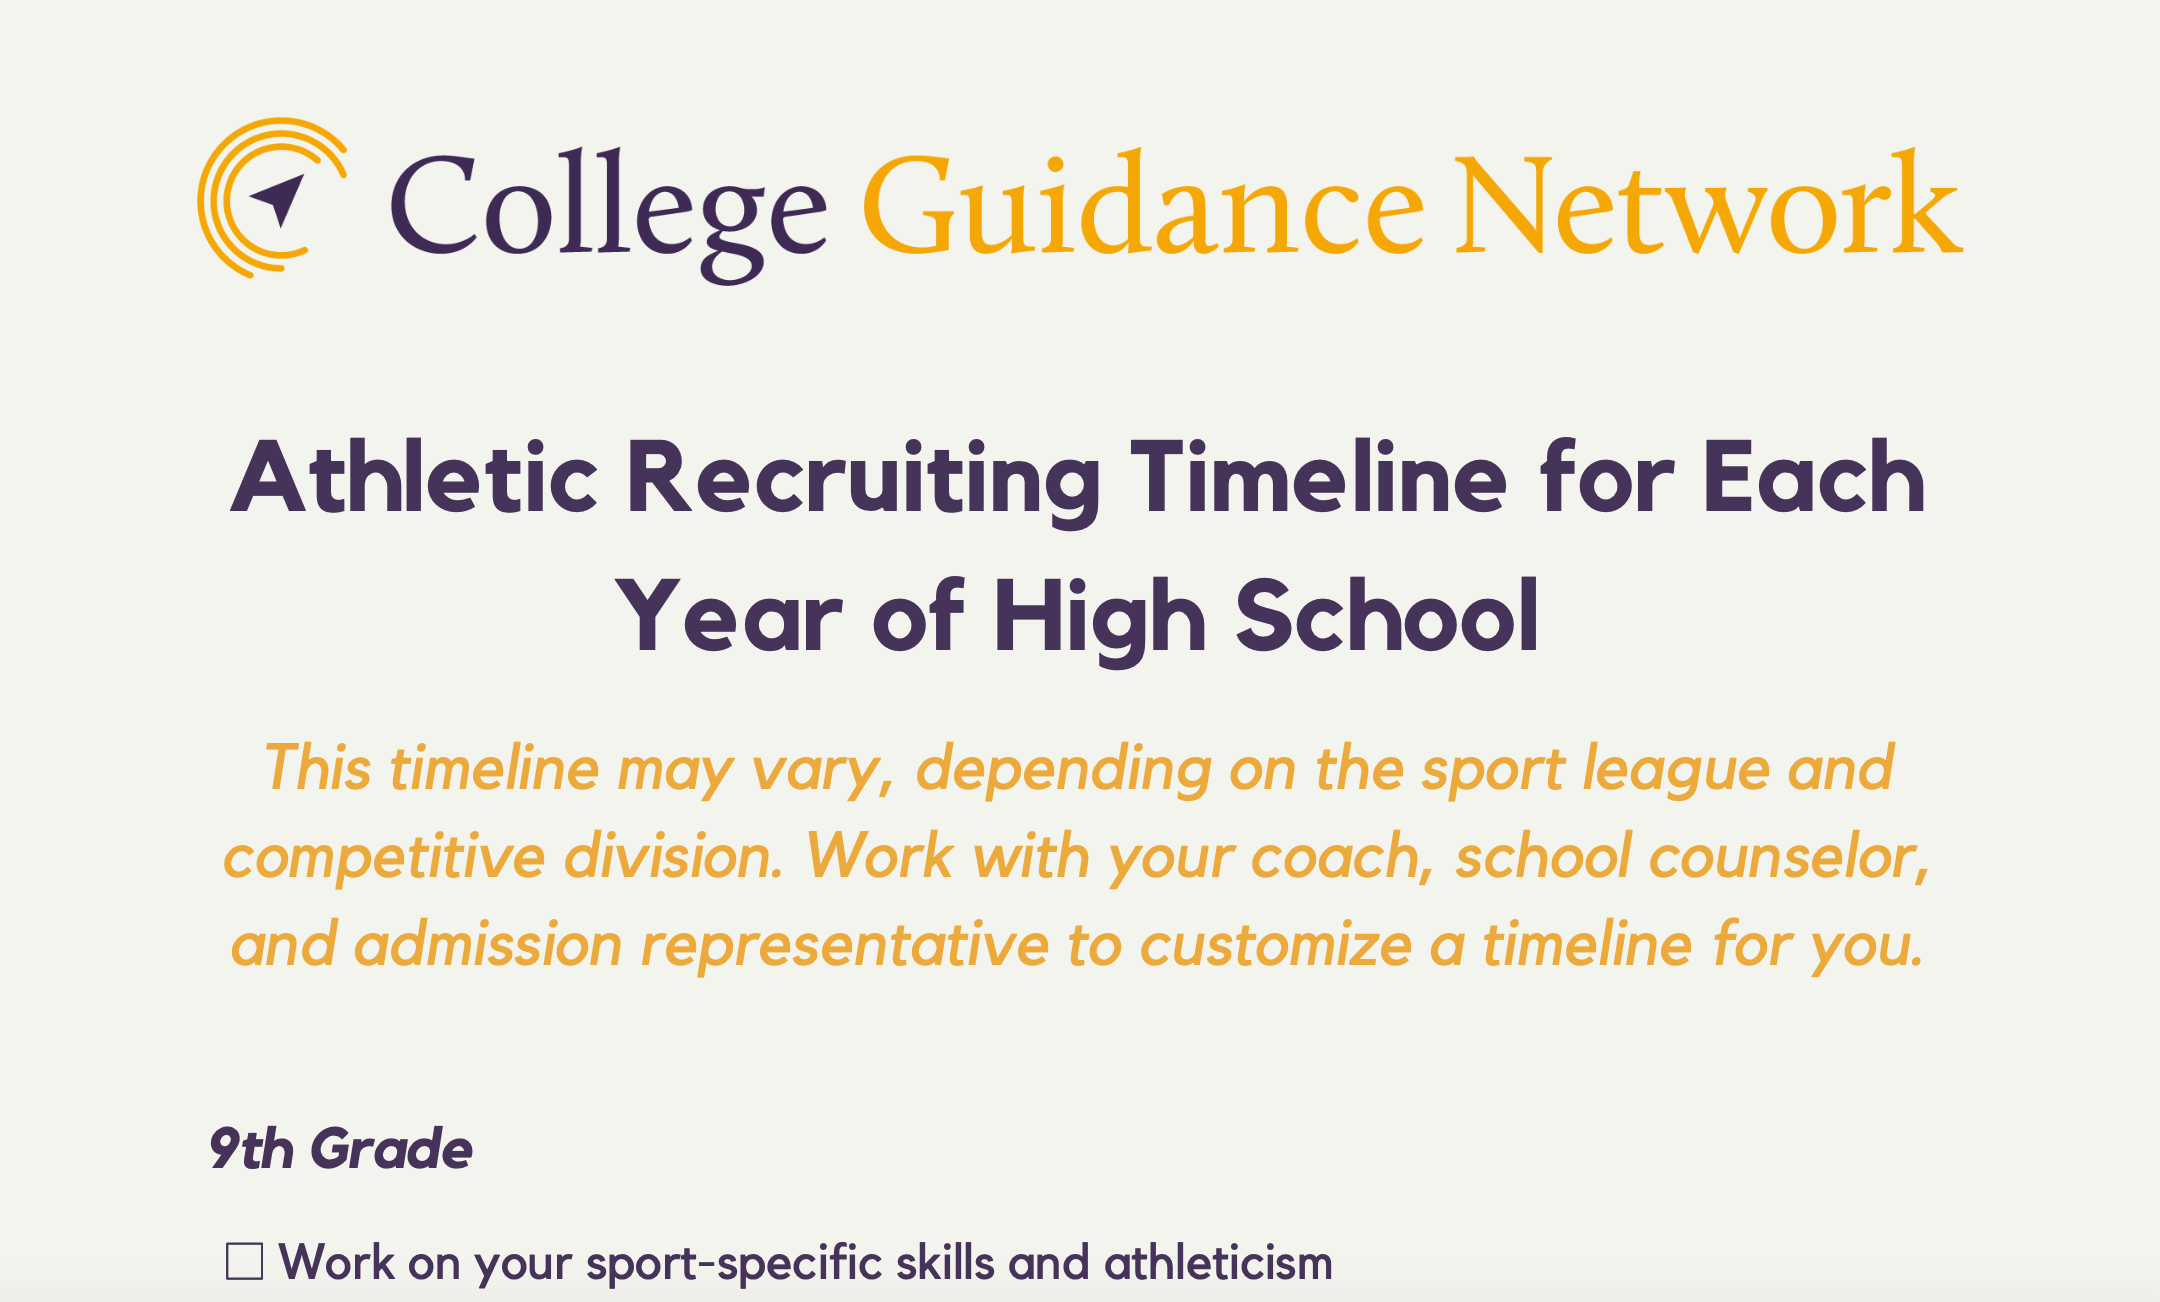 Athletic Recruiting Timeline for Each Year of High School